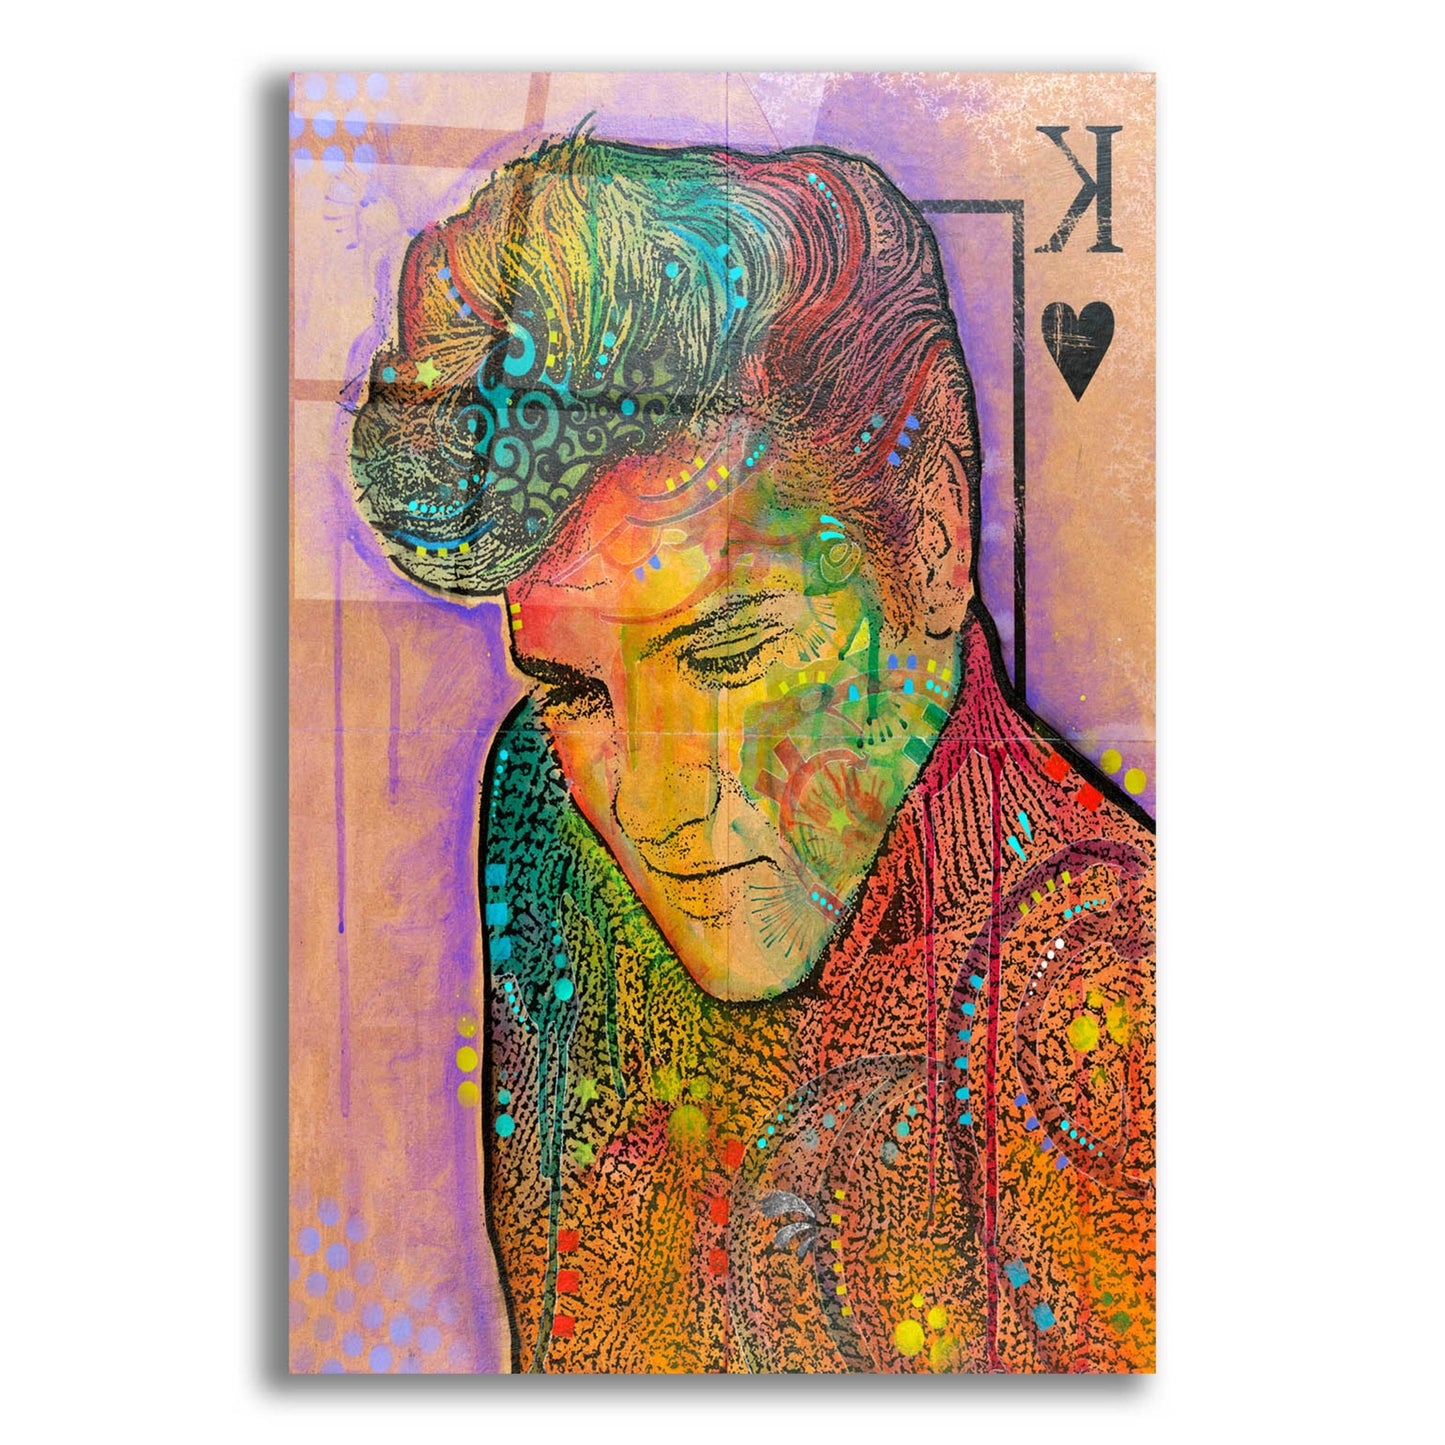 Epic Art 'Elvis - King of Hearts' by Dean Russo, Acrylic Glass Wall Art,16x24